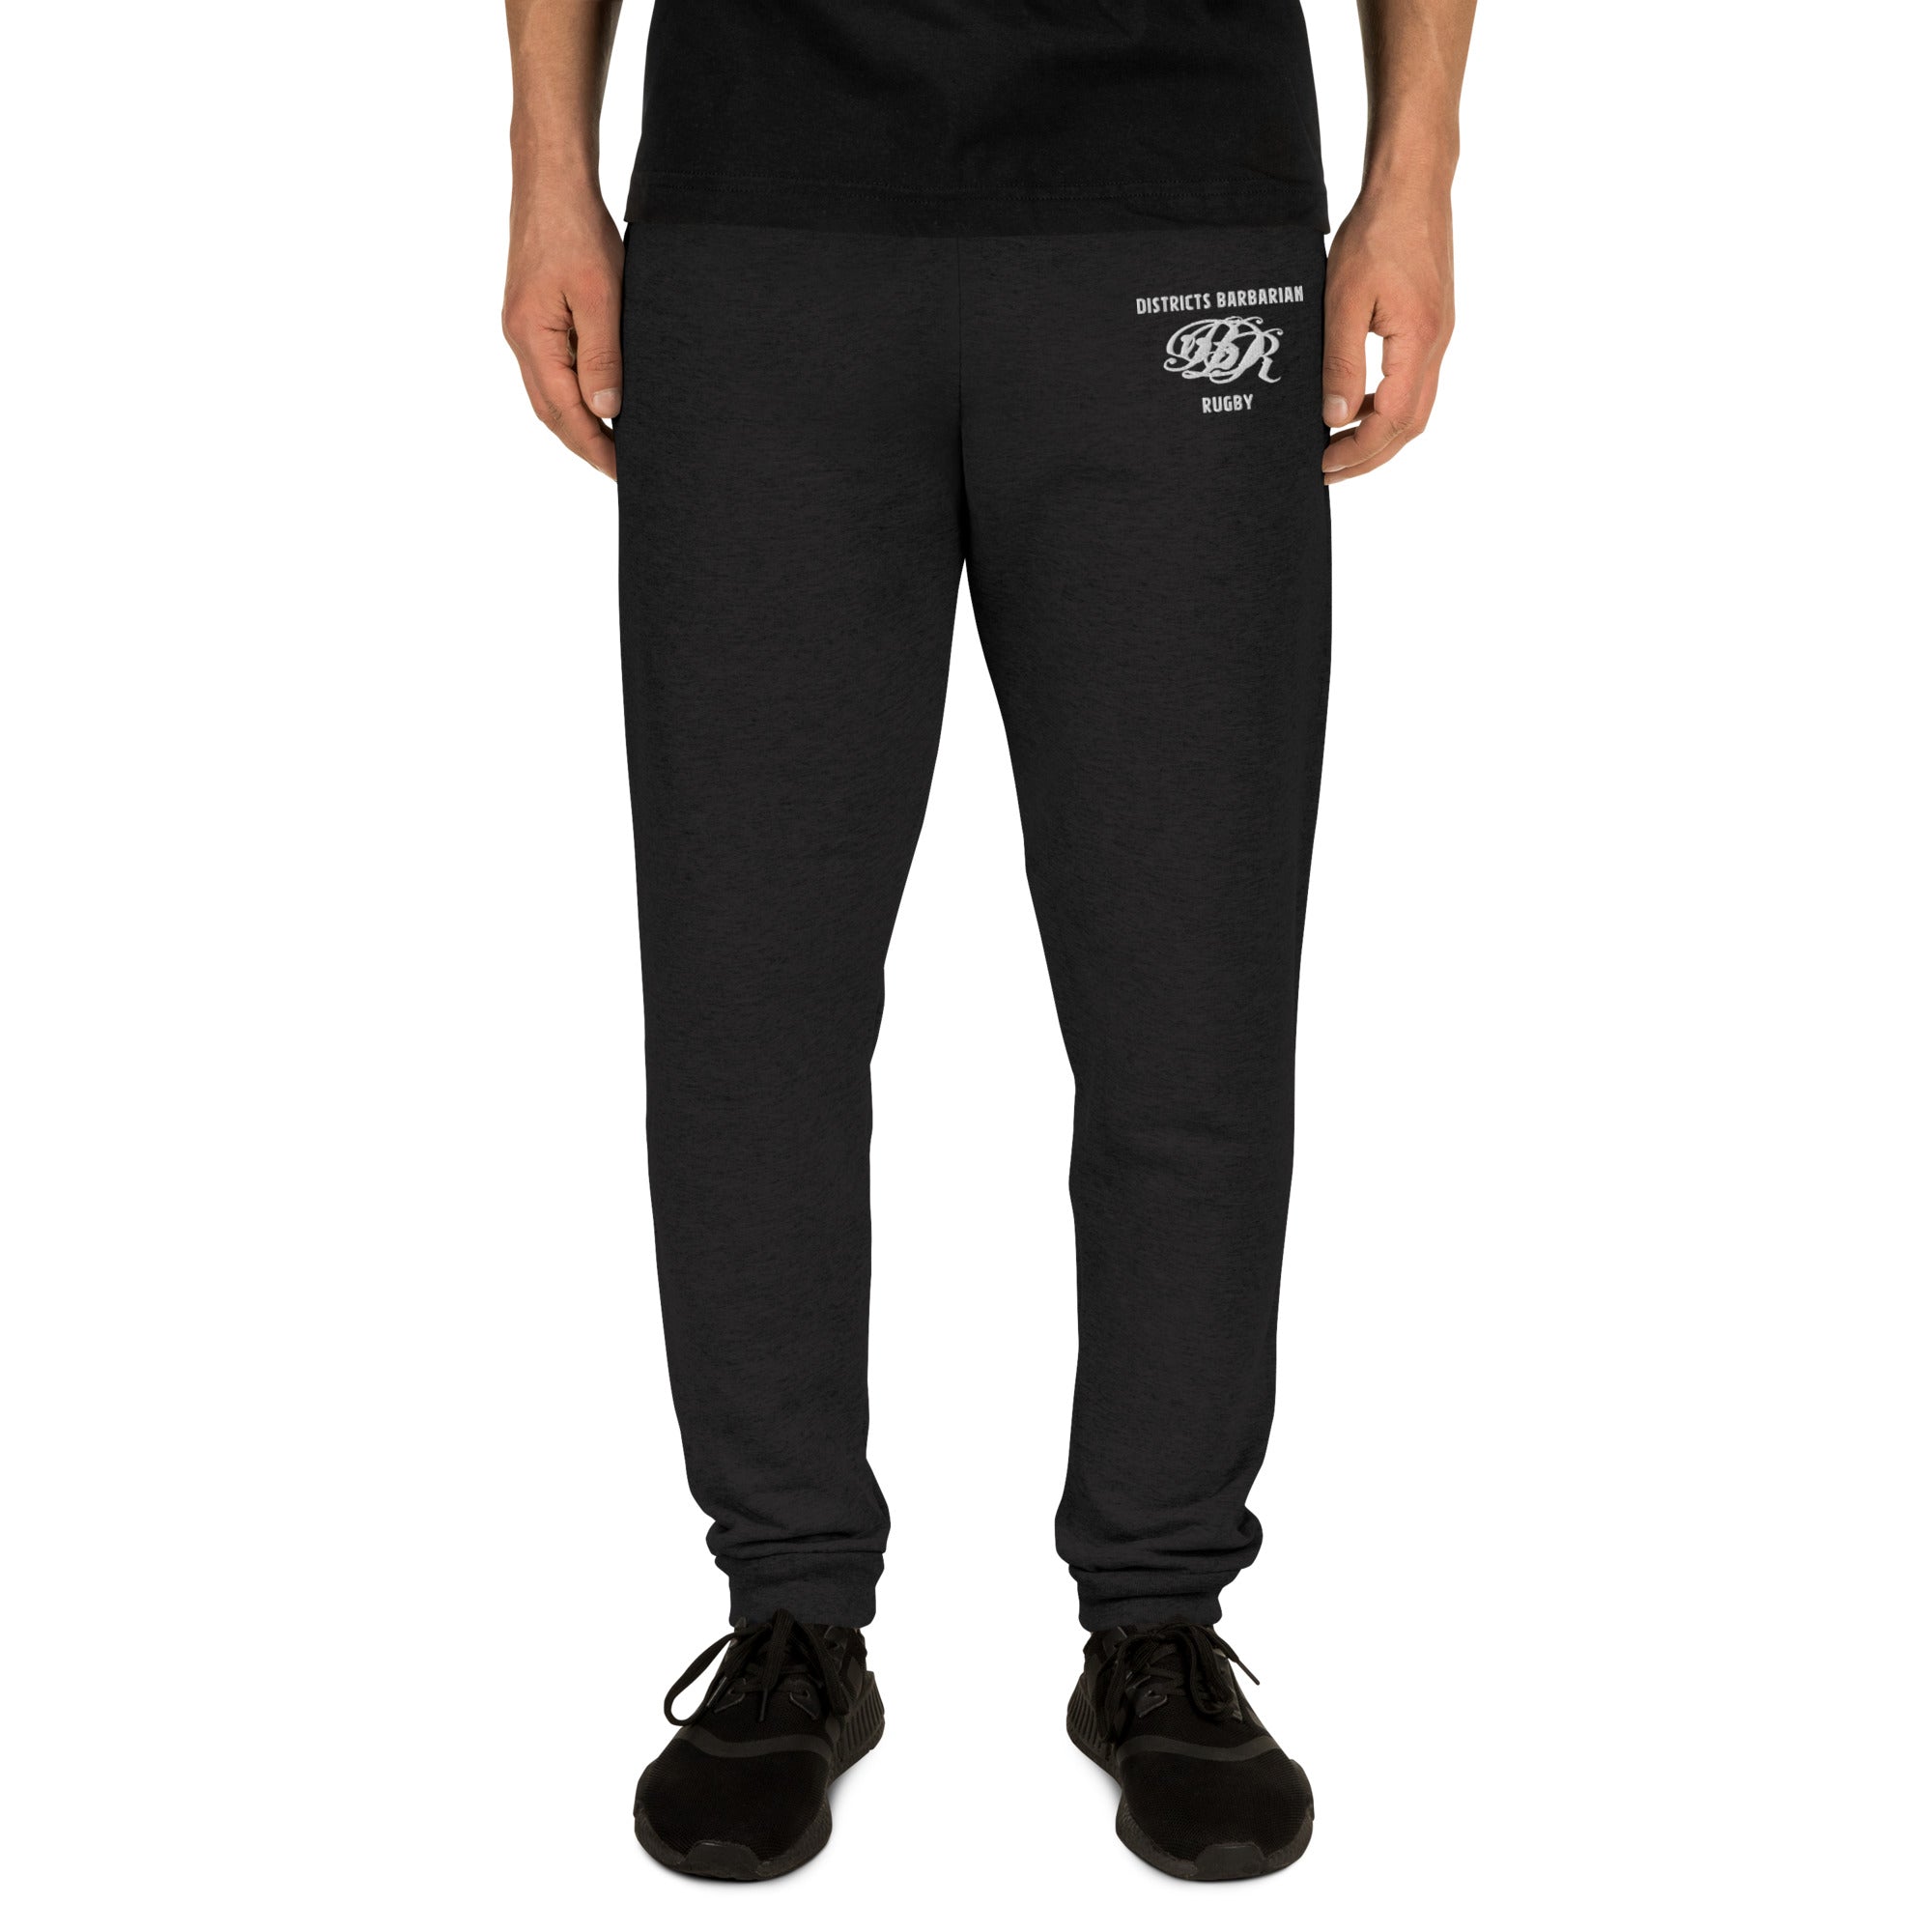 Rugby Imports Districts Barbarian RFC Jogger Sweatpants